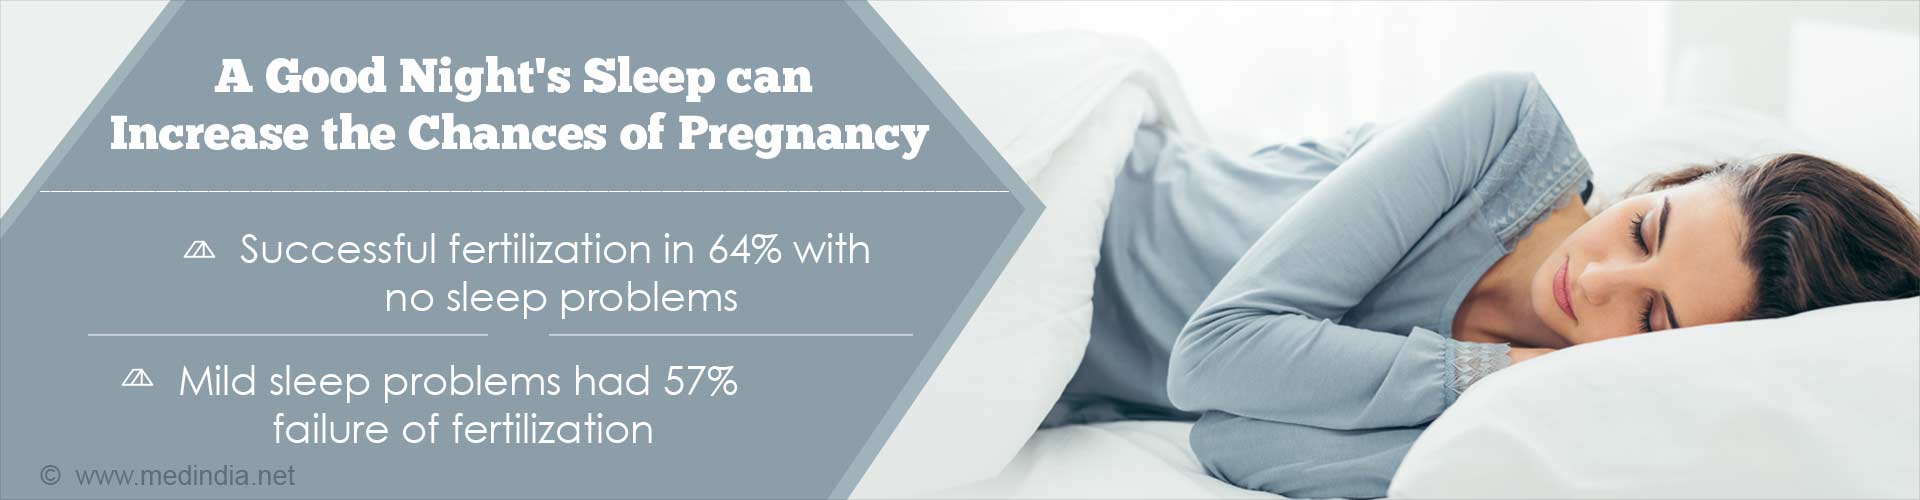 A good night's sleep can increase the chances of pregnancy
- Successful fertilization in 64% with no sleep problems
- Mild sleep problems had 57% failure of fertilization